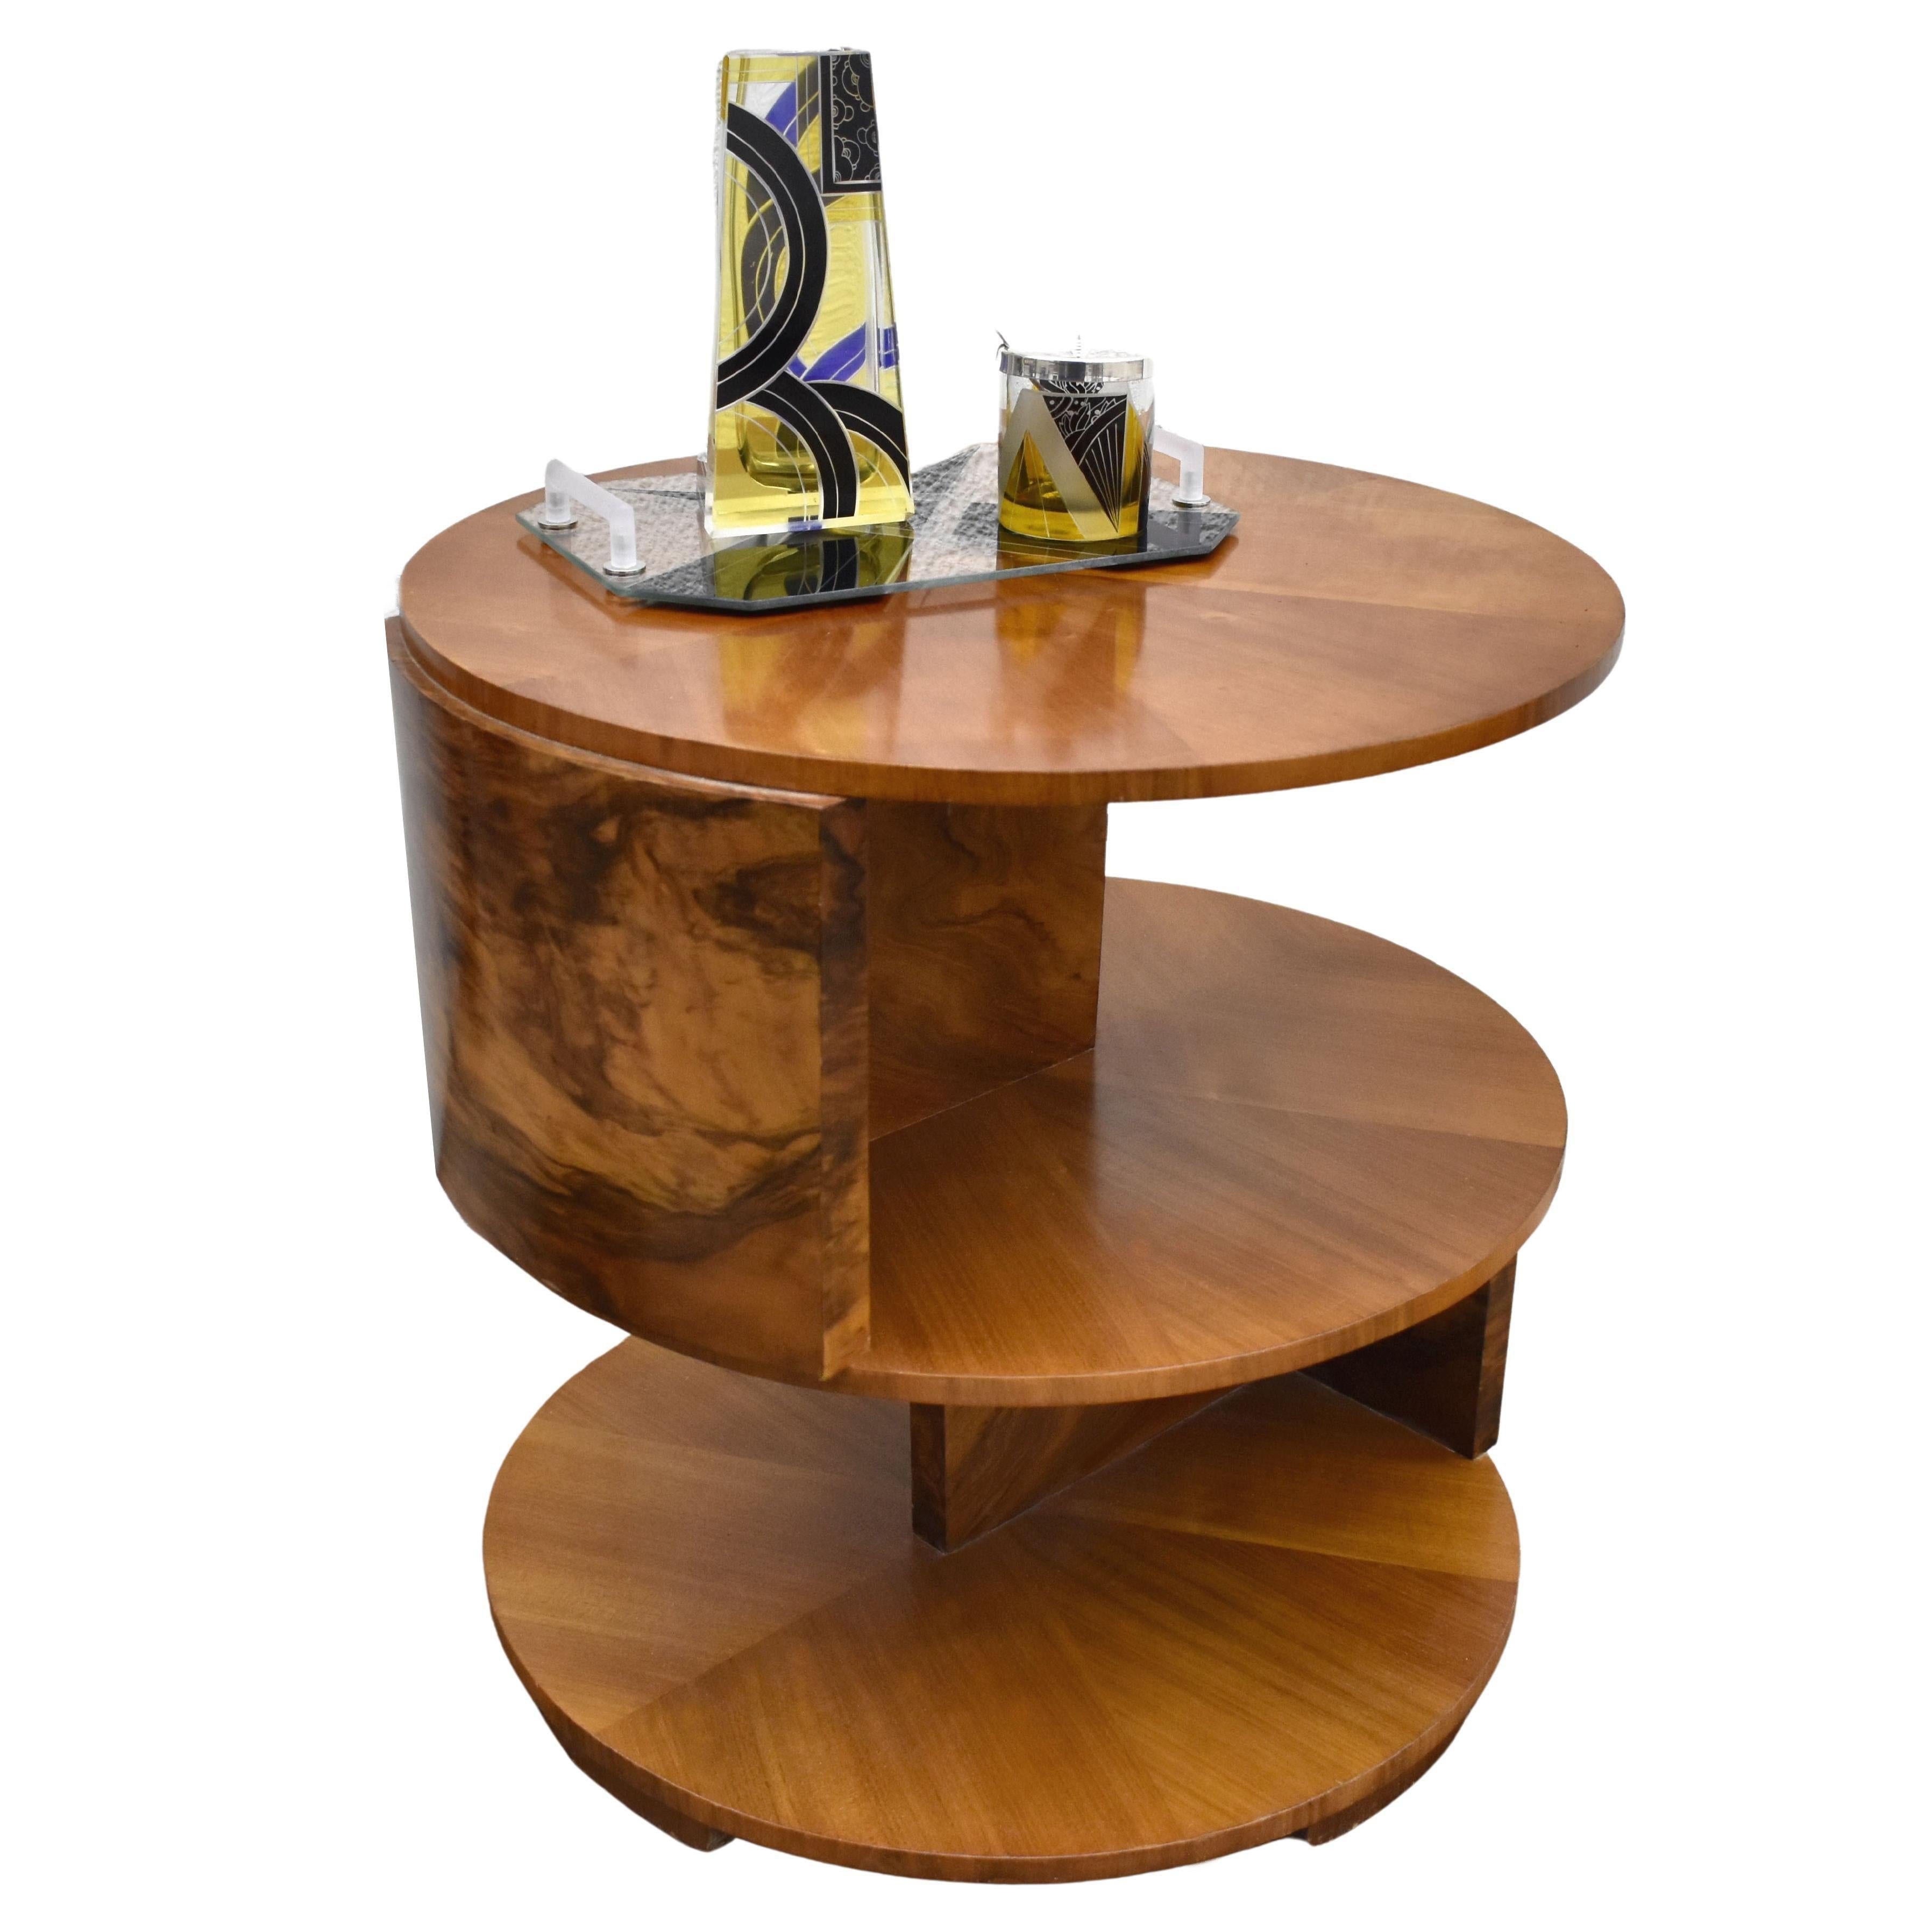 Very stylish Art Deco English Modernist table dating to the 1930s. A very fine example that can be used for multiple purposes, a centre, end, coffee table. An innovative asymmetric design sets this Art Deco occasional or book table apart from run of